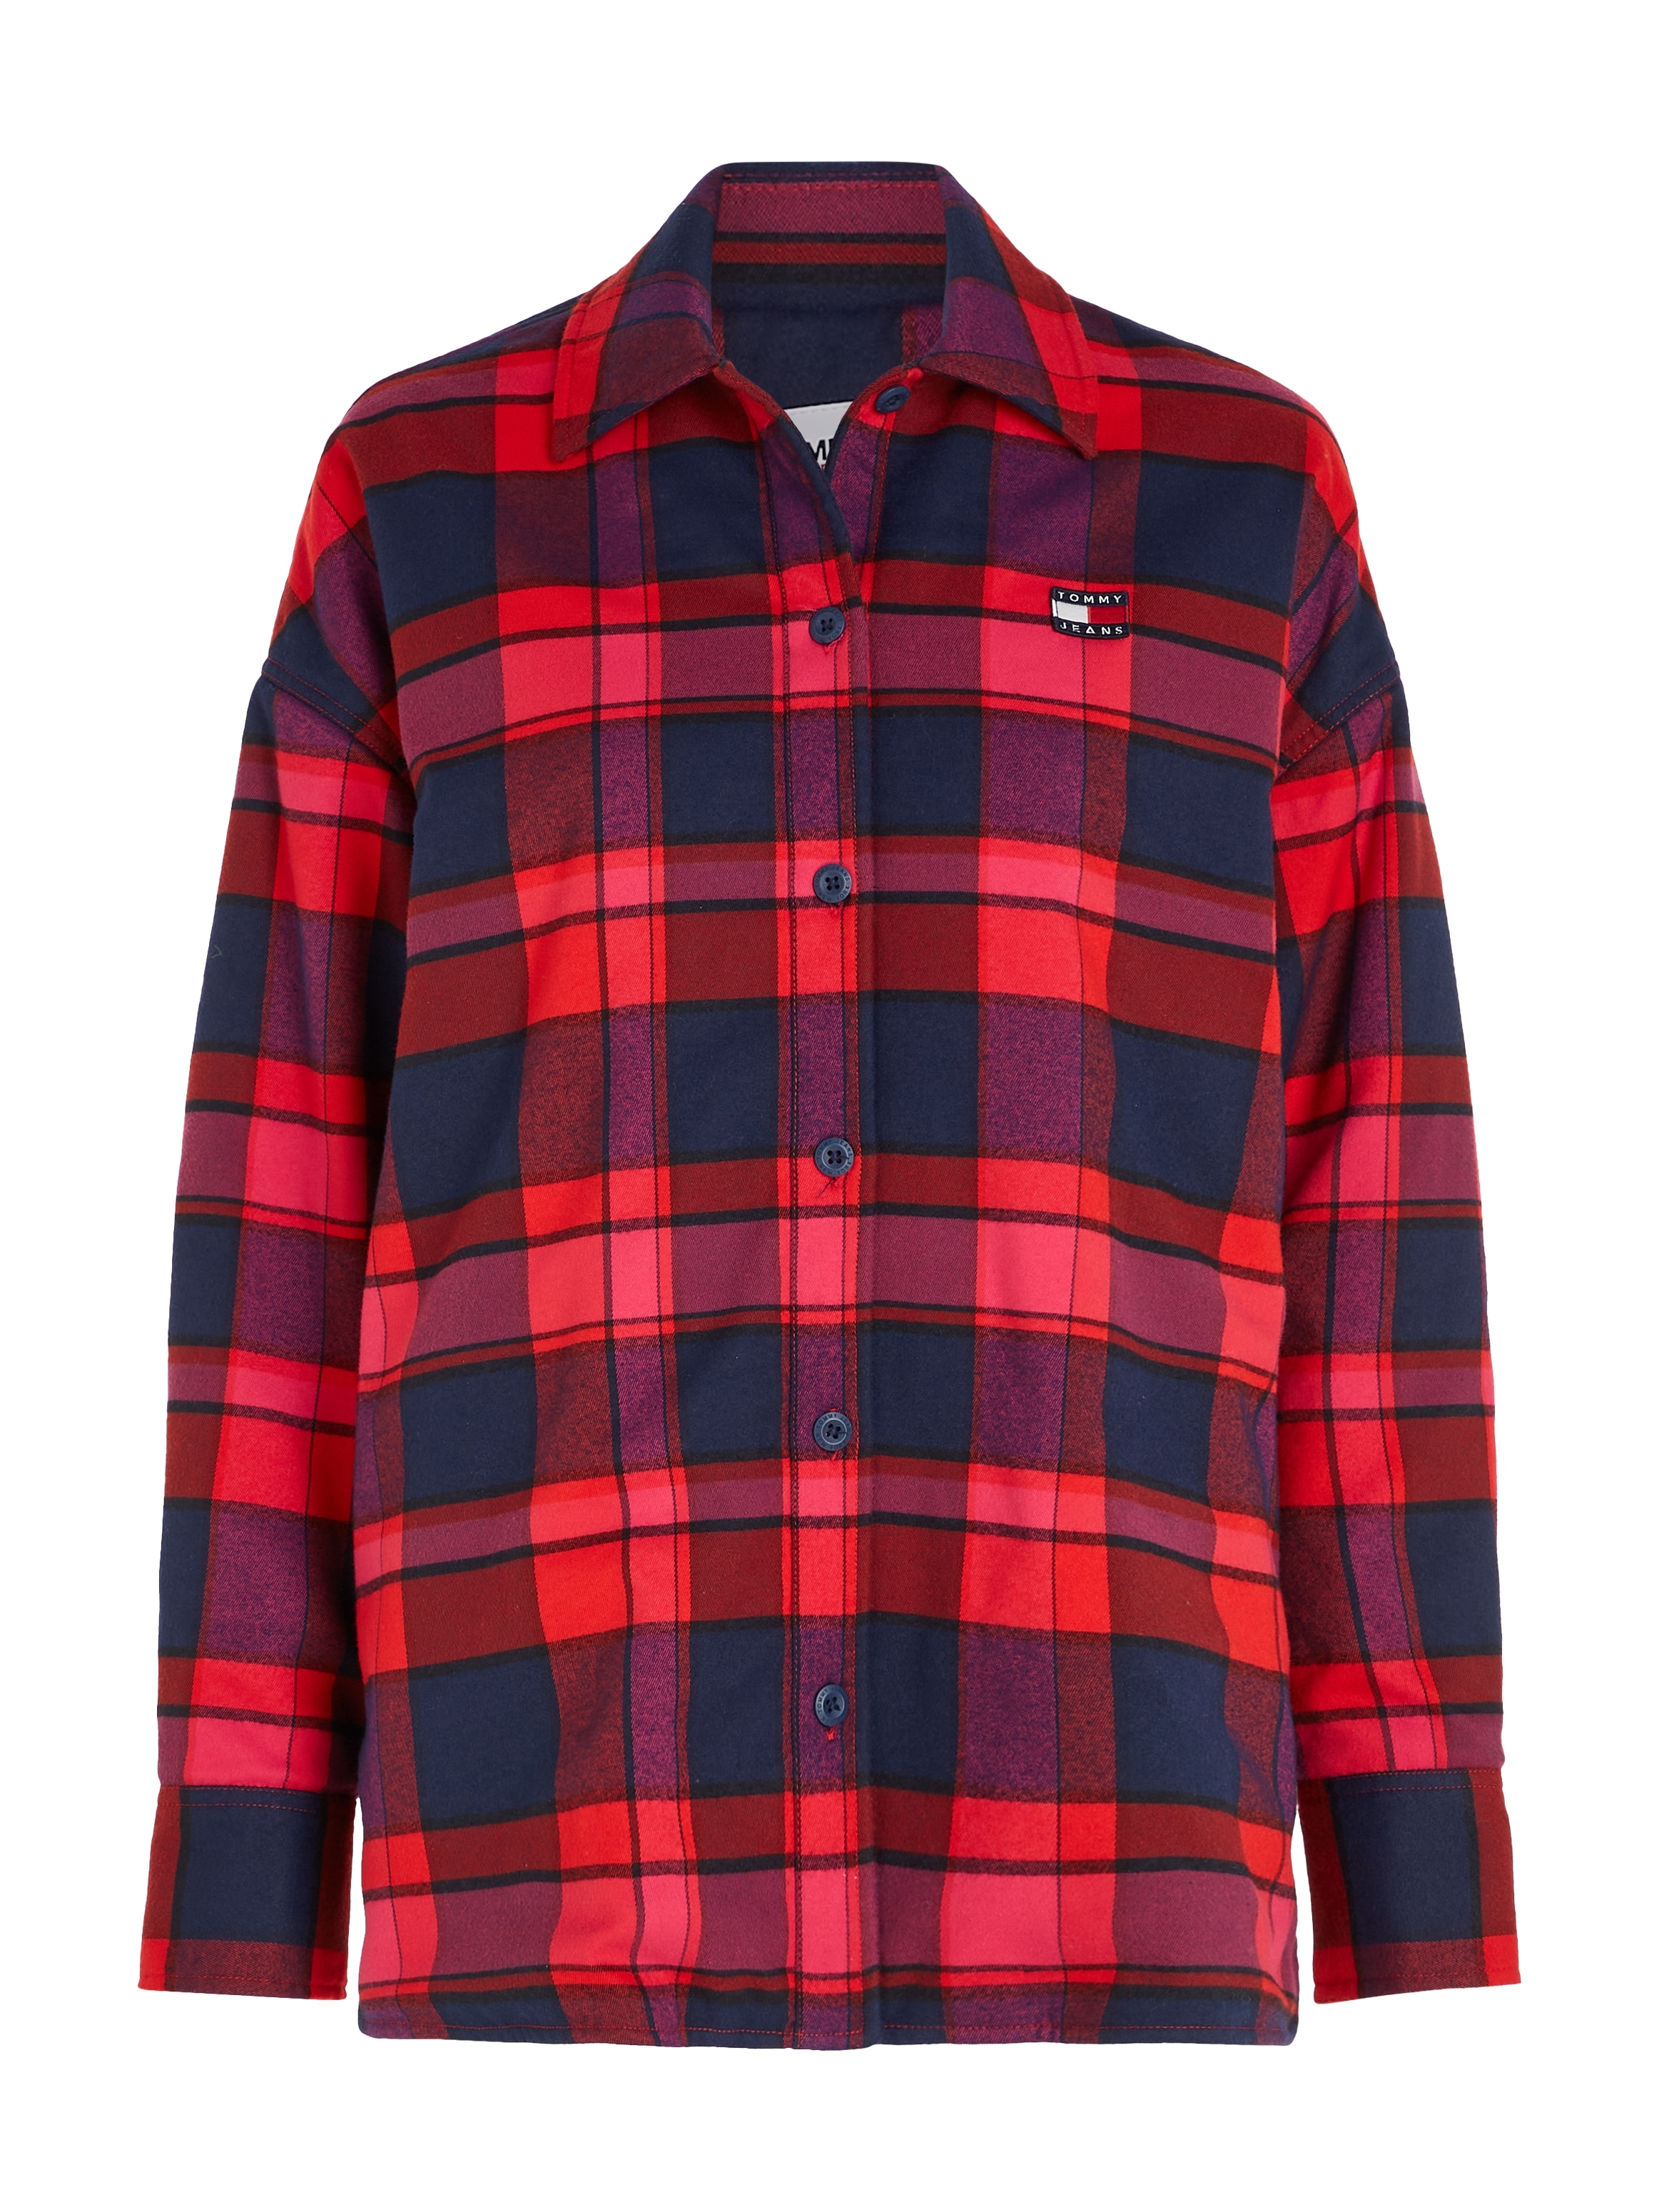 CHECK Label Tommy OVERSHIRT«, SPR bei Jeans OVS Tommy online OTTO Hemdbluse mit Jeans »TJW